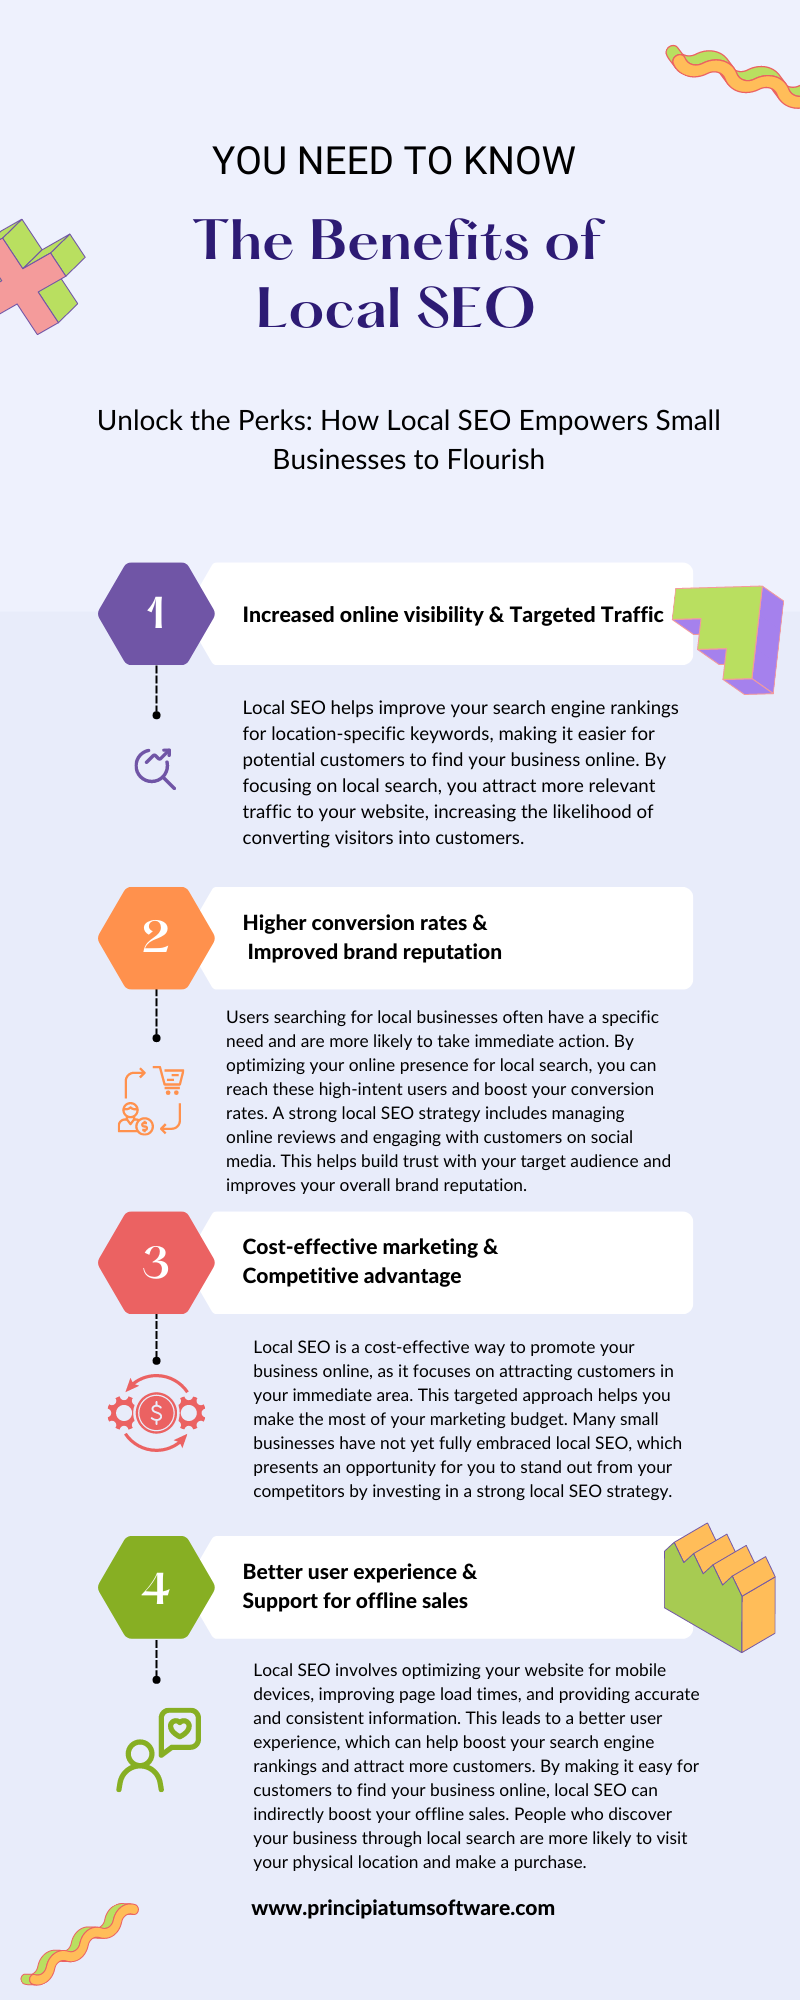 An engaging infographic highlighting the key benefits of local SEO for small businesses, showcasing increased visibility, targeted traffic, higher conversion rates, improved brand reputation, cost-effective marketing, competitive advantage, better user experience, and support for offline sales